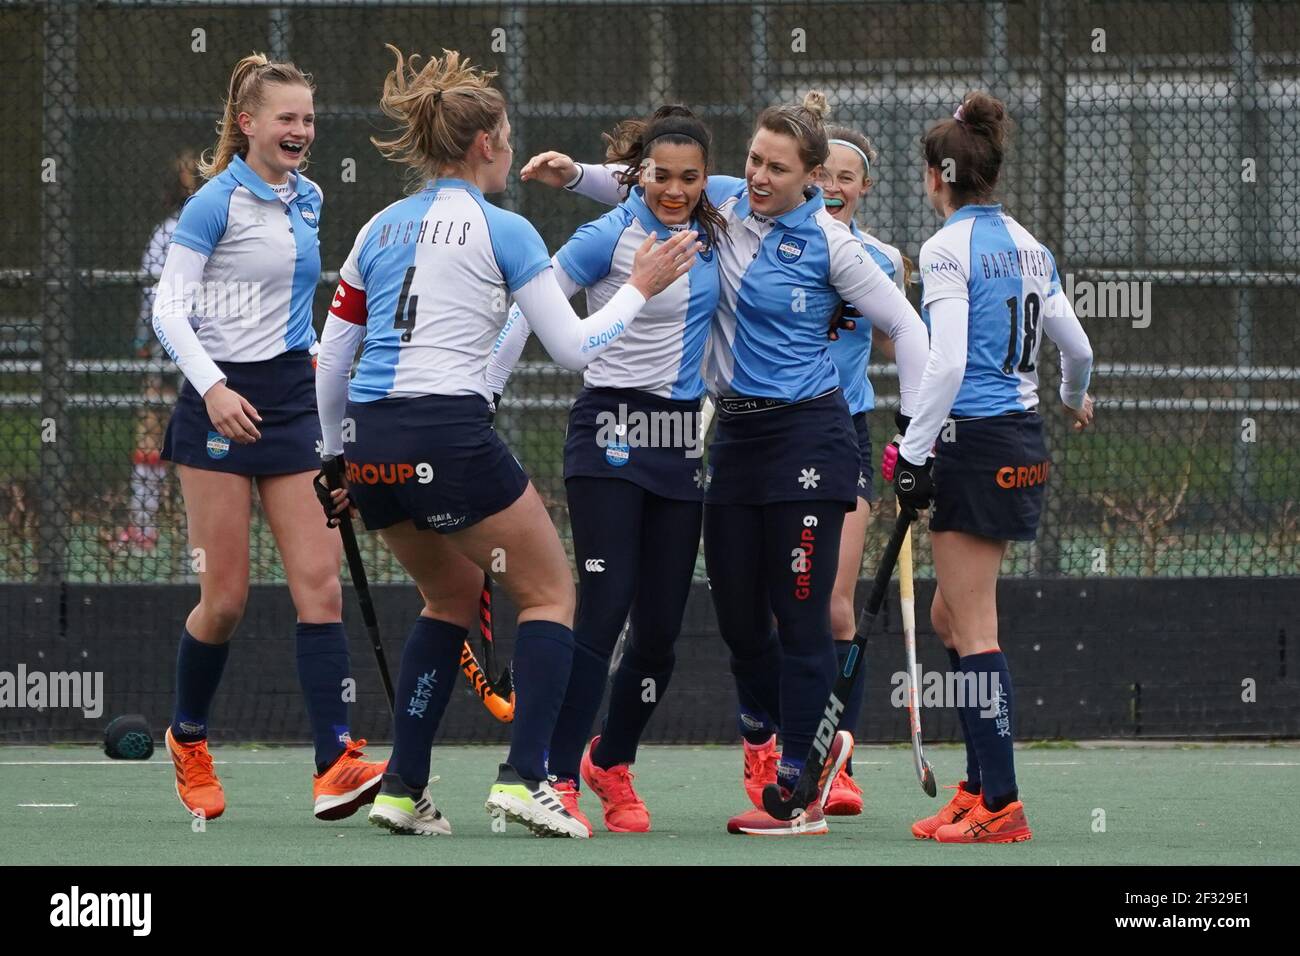 AMSTELVEEN, NETHERLANDS - MARCH 14: Players of Hurley celebrating the second goal of their team during the Dutch Hockey Women Hoofdklasse match between Hurley D1 and HGC D1 at Sportpark Amsterdamse